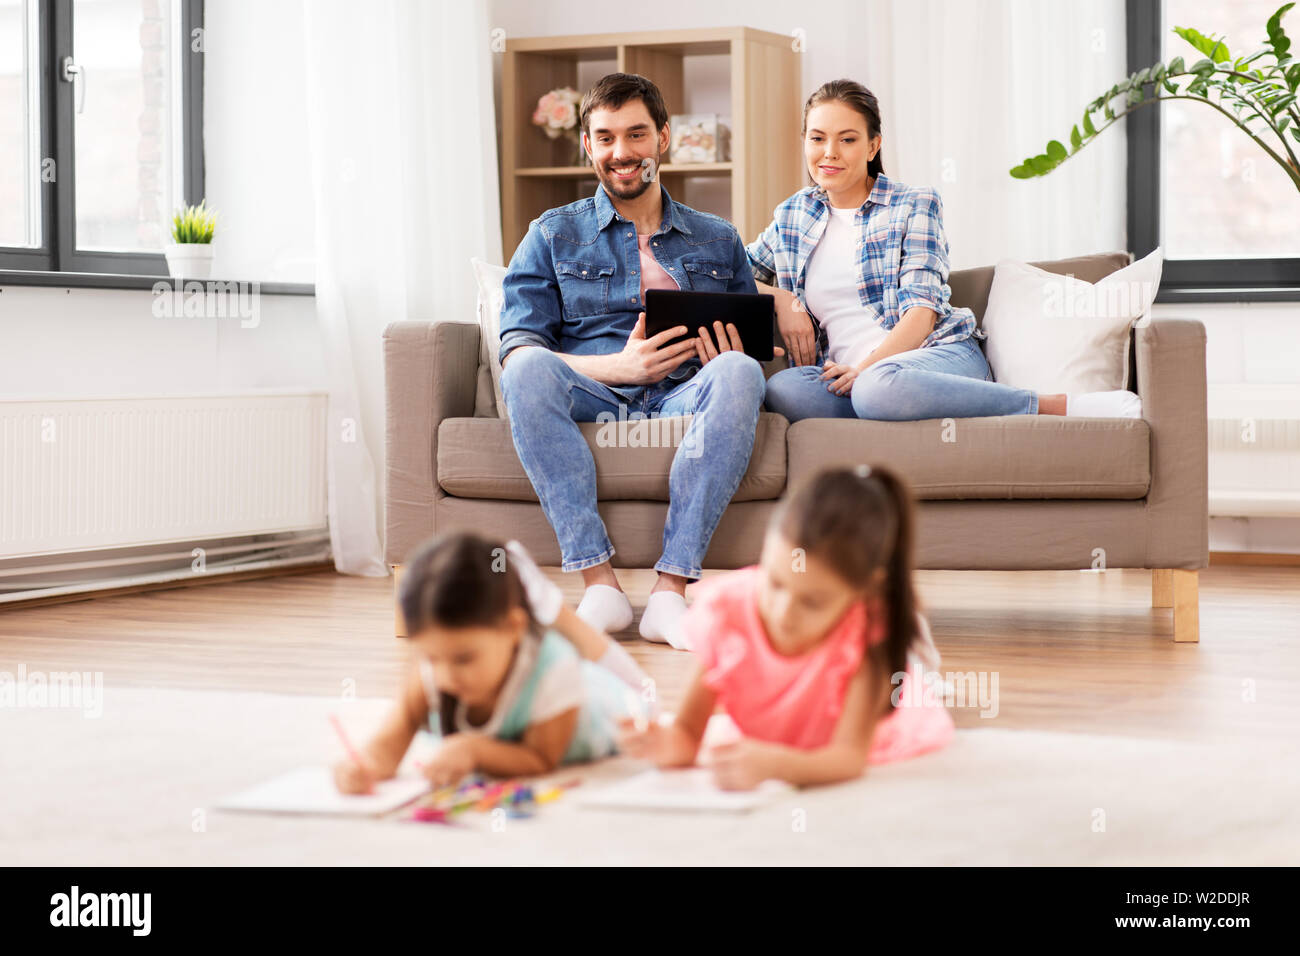 happy family spending free time at home Stock Photo